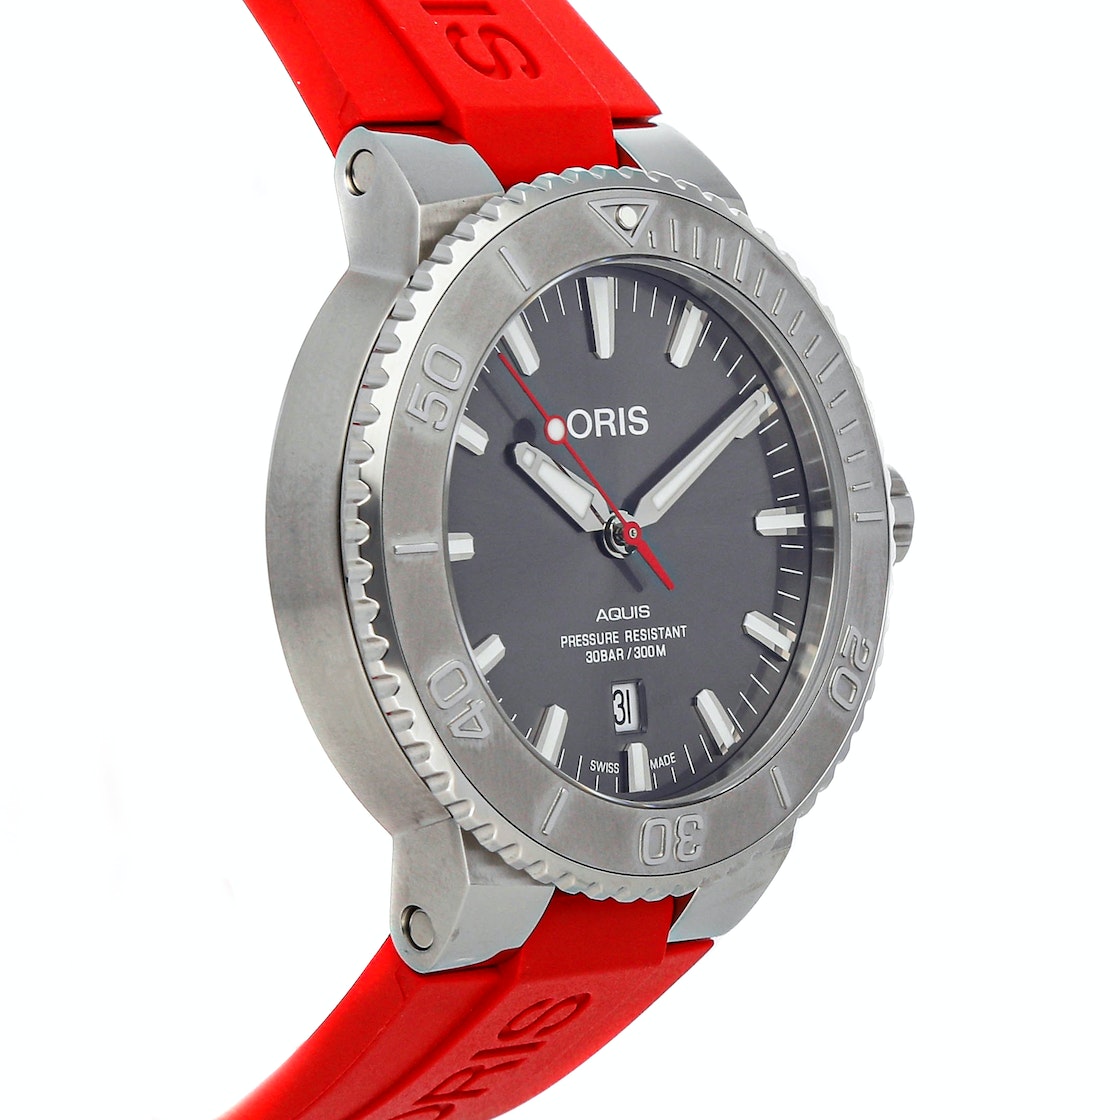 Oris Aquis Date Relief Grey Dial Red Rubber Strap Watch for Men - 0173377304153-0742466EB